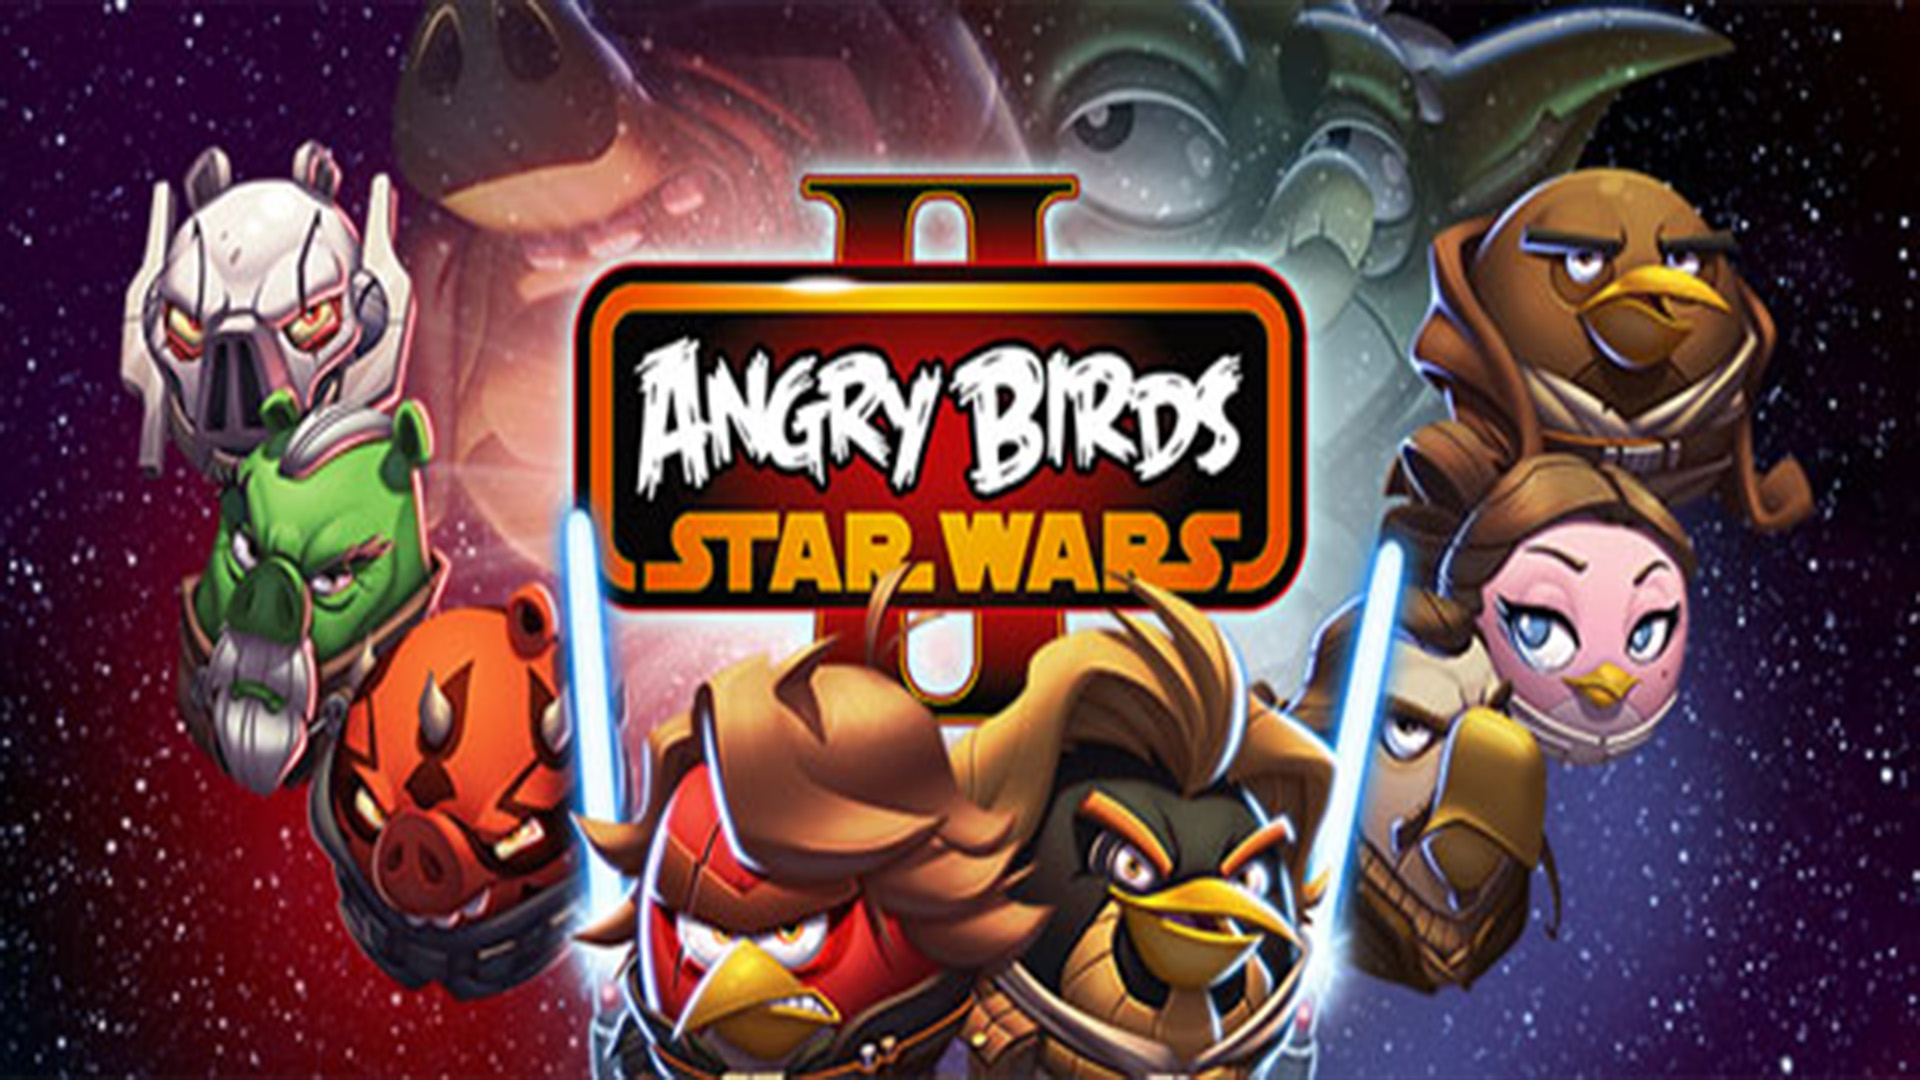 Angry Birds PC Downloads – Cloaked Thargoid